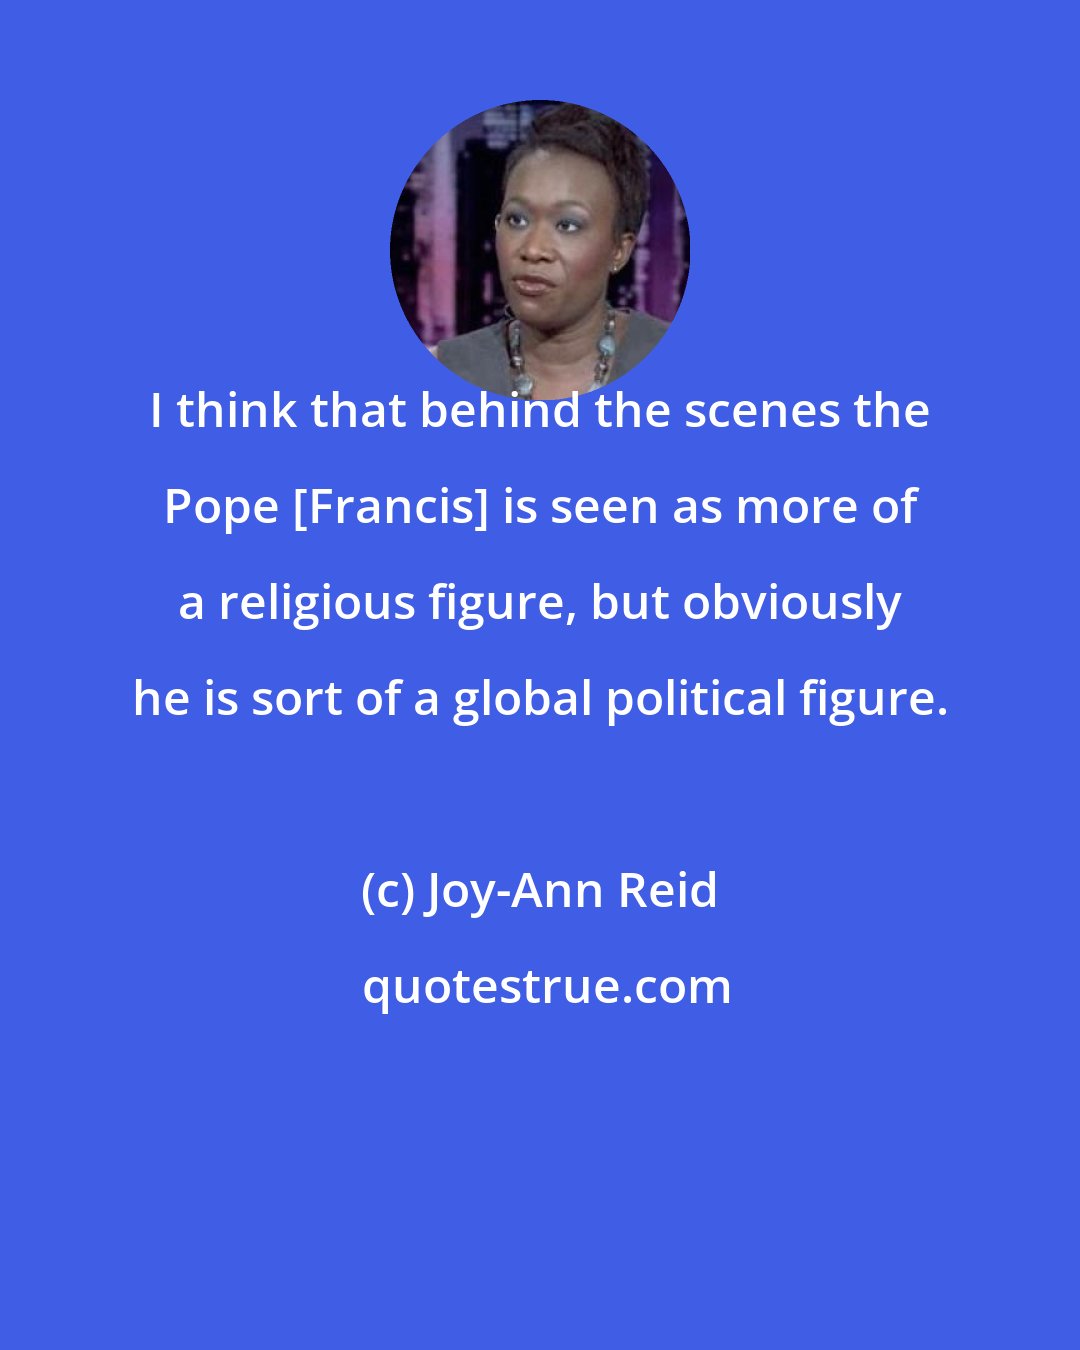 Joy-Ann Reid: I think that behind the scenes the Pope [Francis] is seen as more of a religious figure, but obviously he is sort of a global political figure.